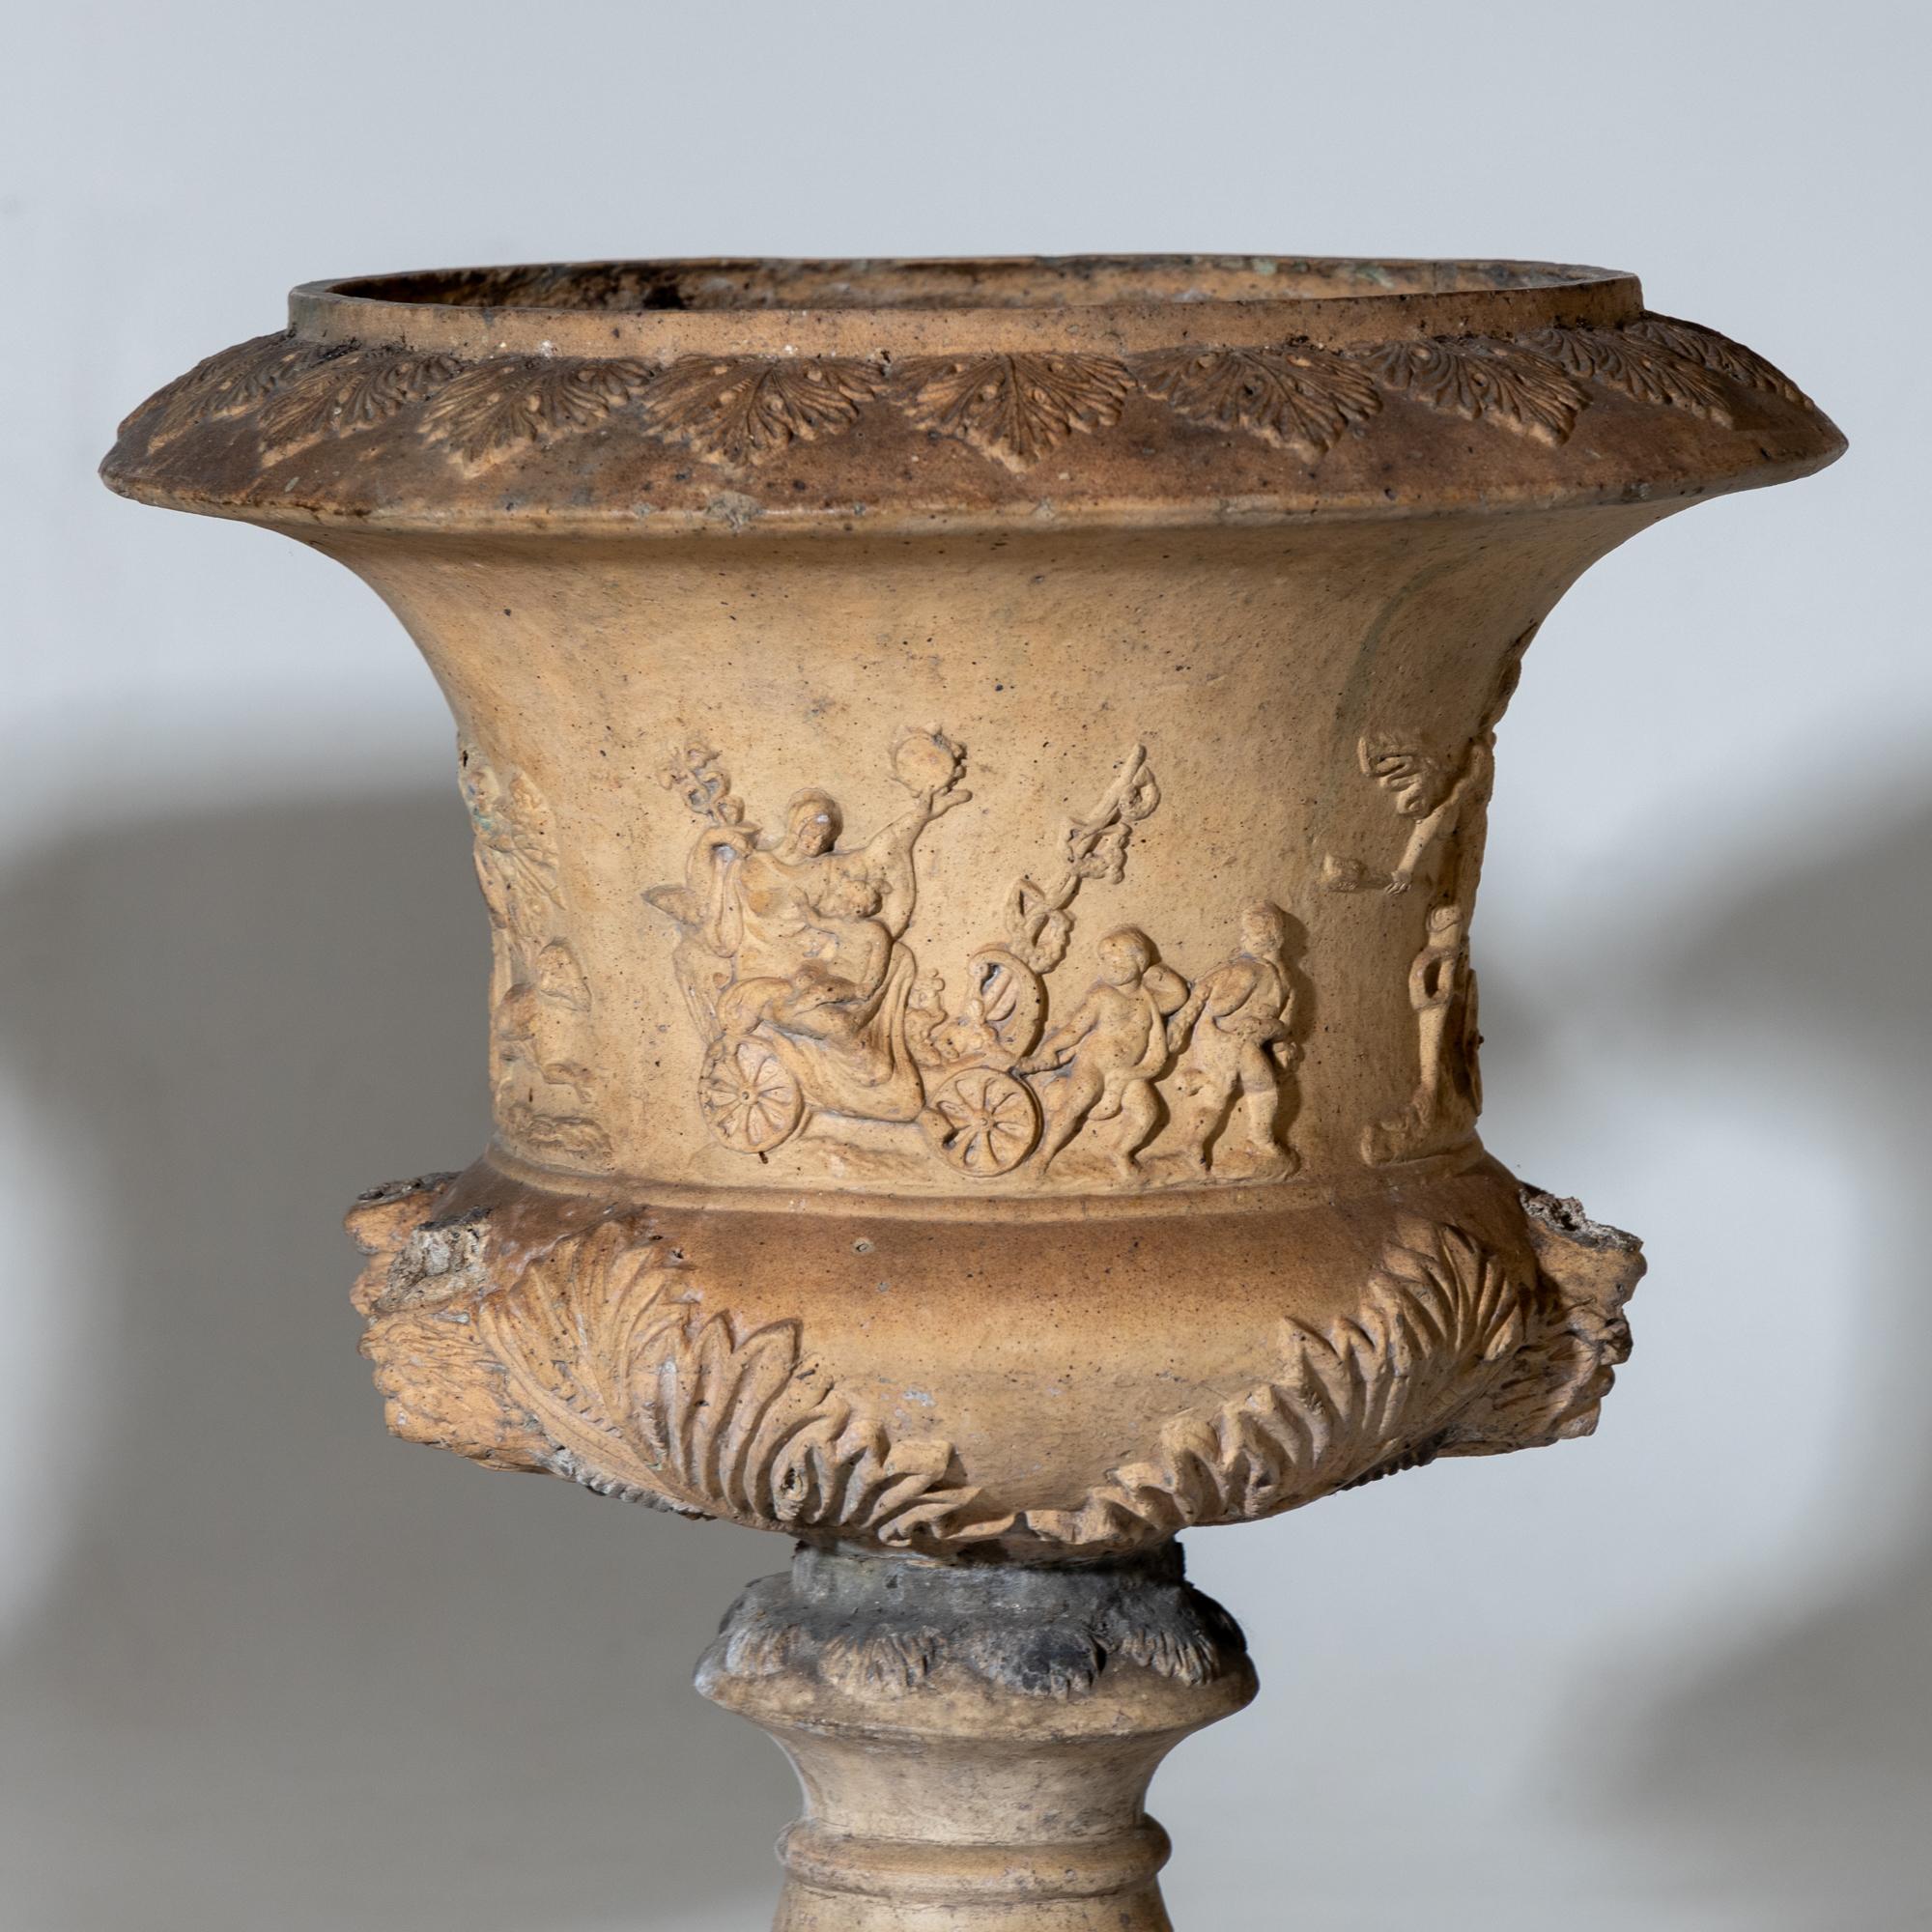 Italian Terracotta Crater Vases, Italy 2nd Half 19th Century For Sale